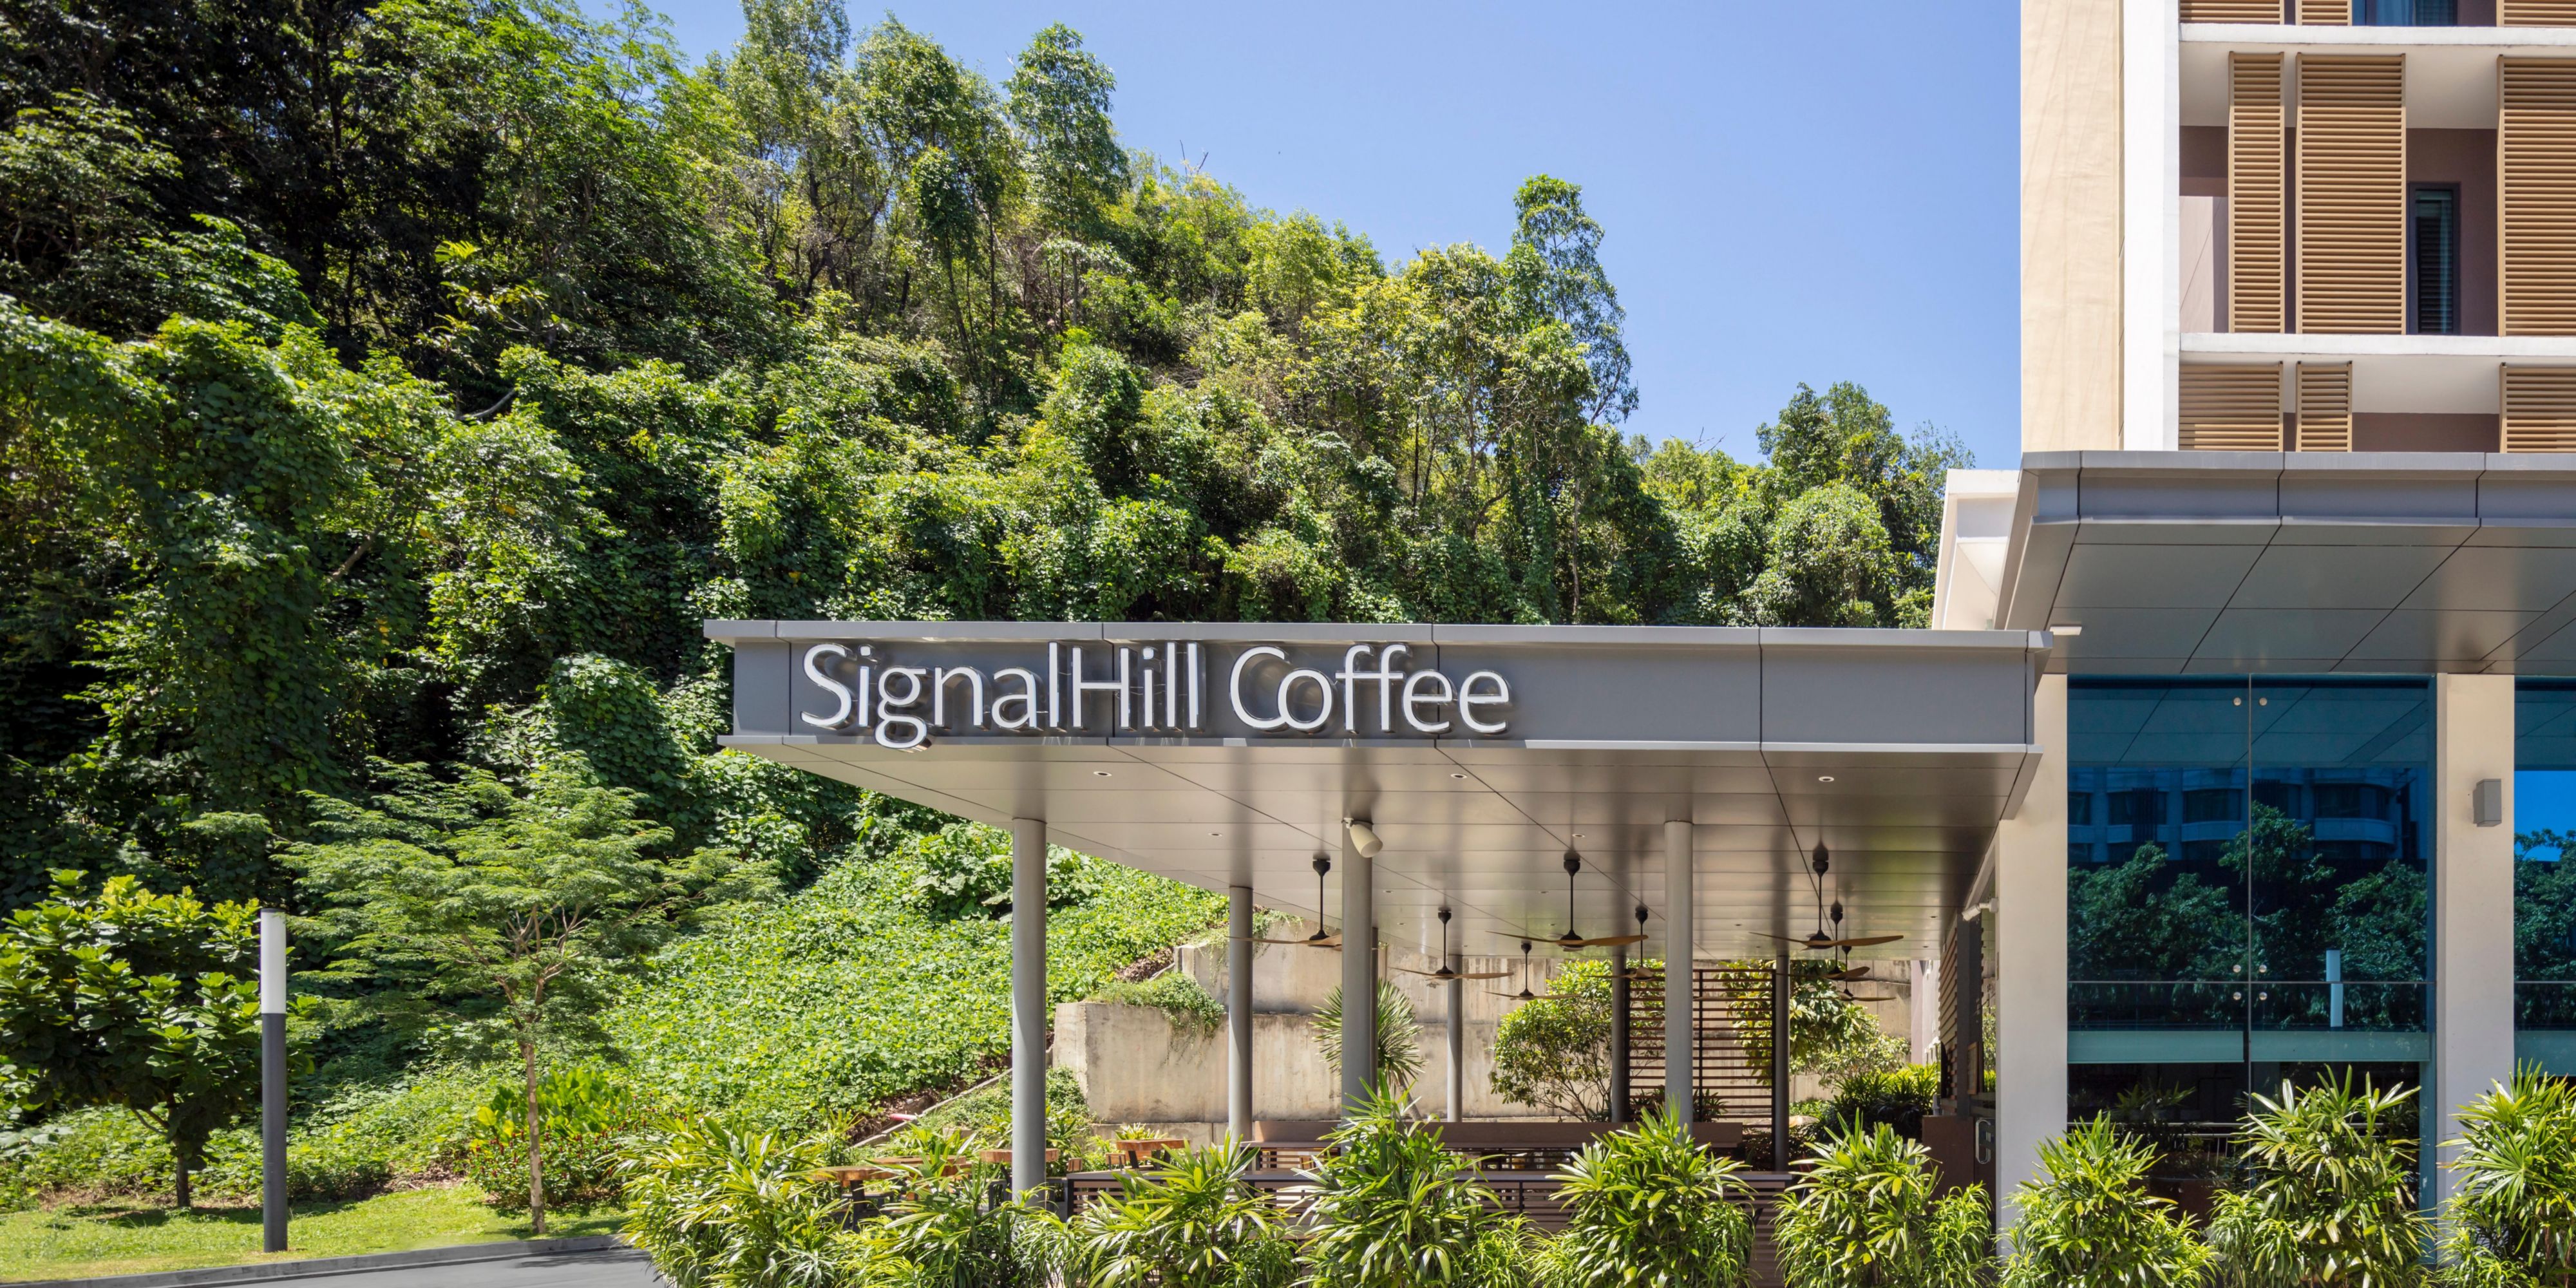 An idyllic open-air dining hideout set against the lush greenery of Signal Hill, SignalHill Coffee is a cosy enclave where locals meet that exudes a laidback charm. 

Kick back in the al-fresco veranda and enjoy a quiet cup of coffee or opt for selected house pour to pair them with our classic all-day offerings.